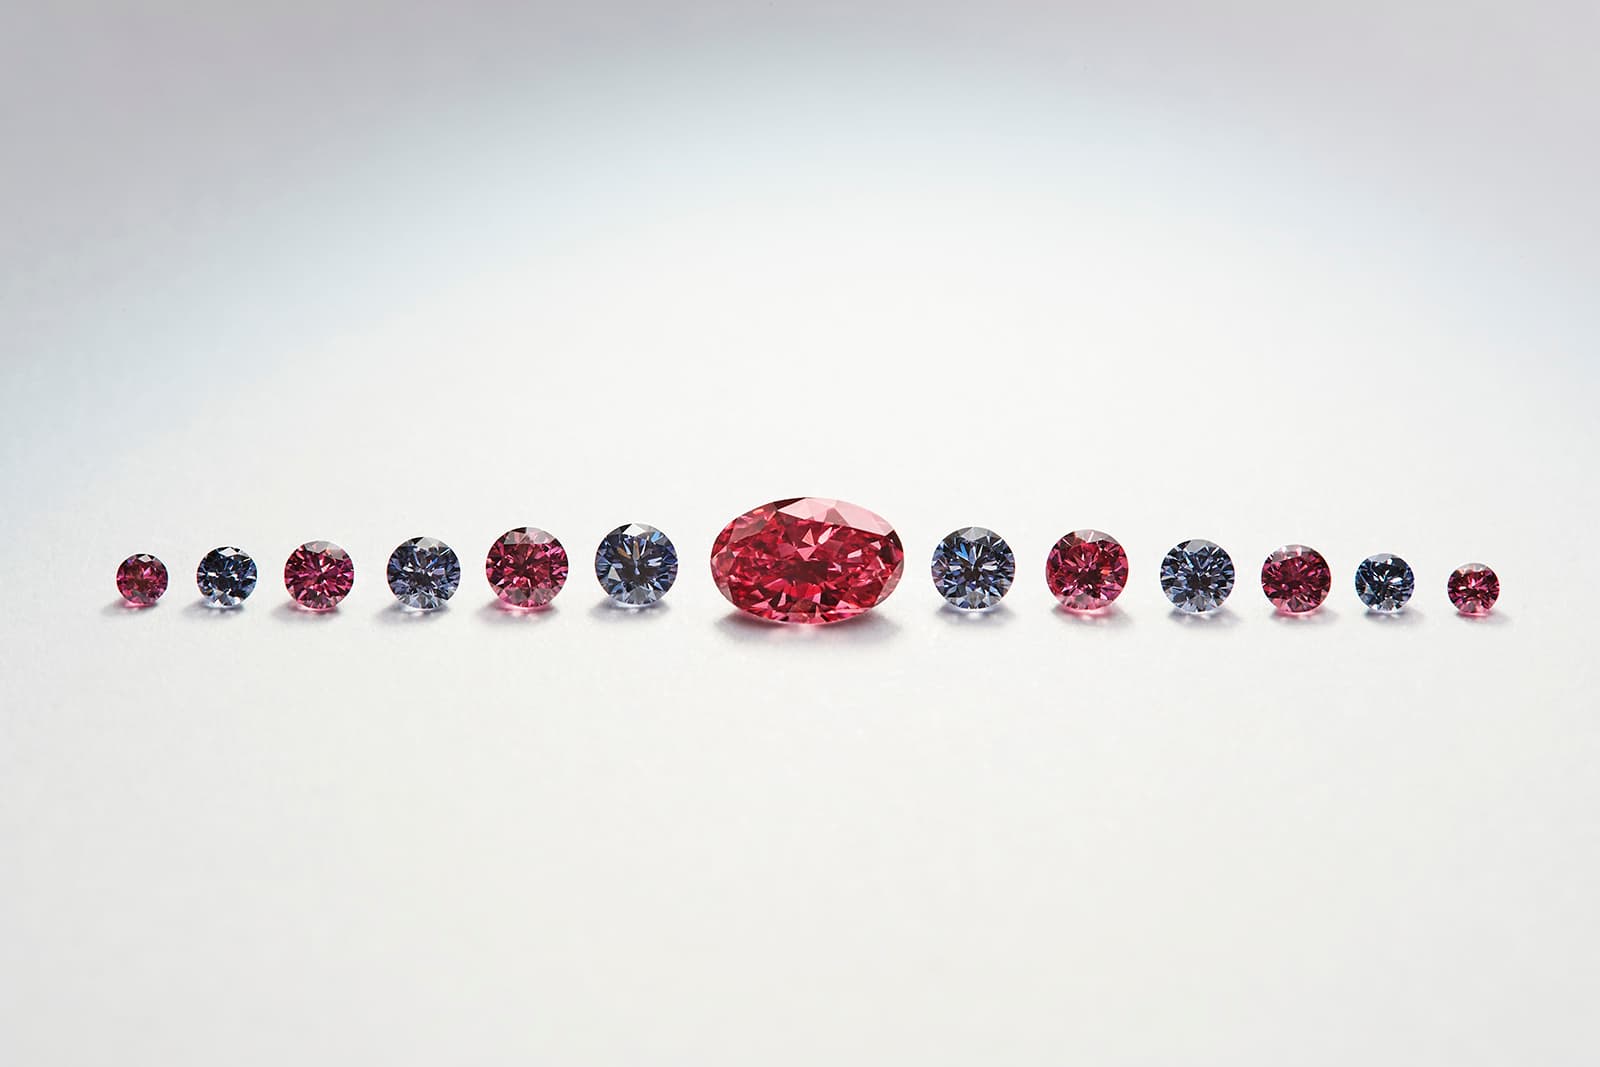 The ‘Petit Oiseau’ selection of blue and red diamonds from the Arygle Pink Diamond Petite Suites Collection